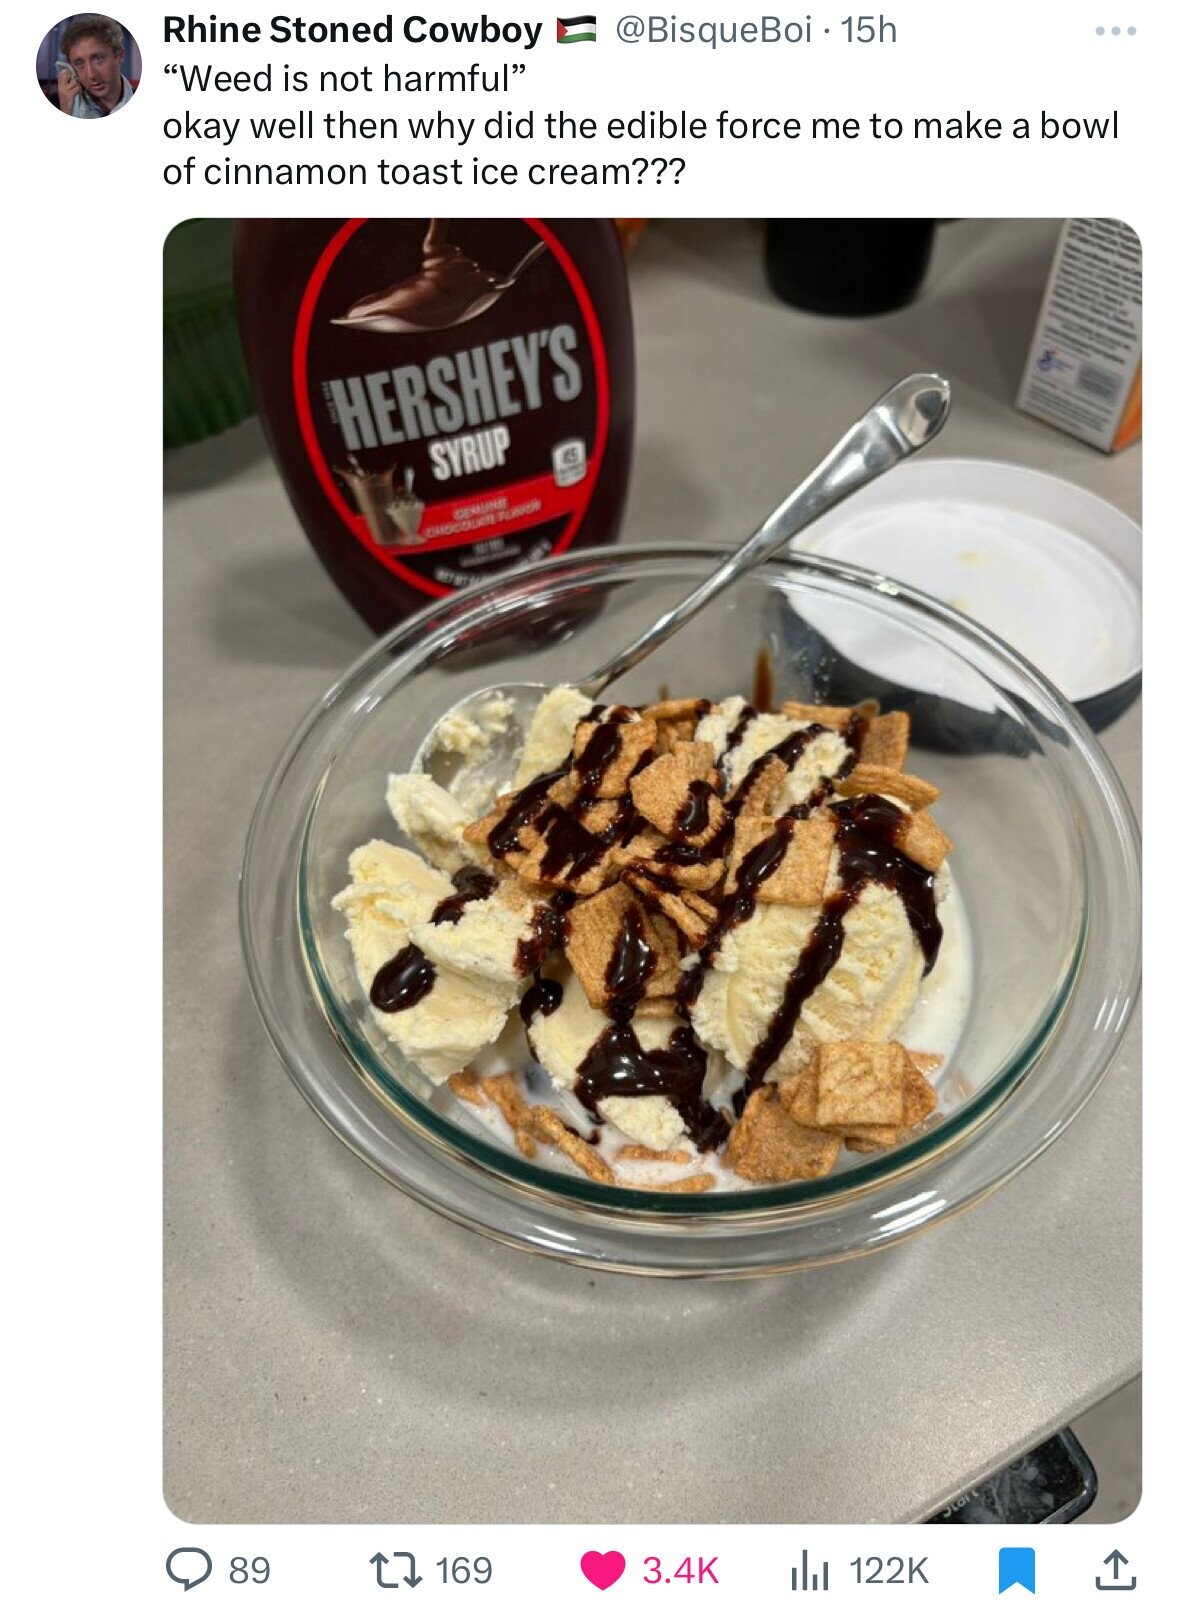 sundae - Rhine Stoned Cowboy "Weed is not harmful" 15h okay well then why did the edible force me to make a bowl of cinnamon toast ice cream??? 89 Hershey'S Syrup 169 l